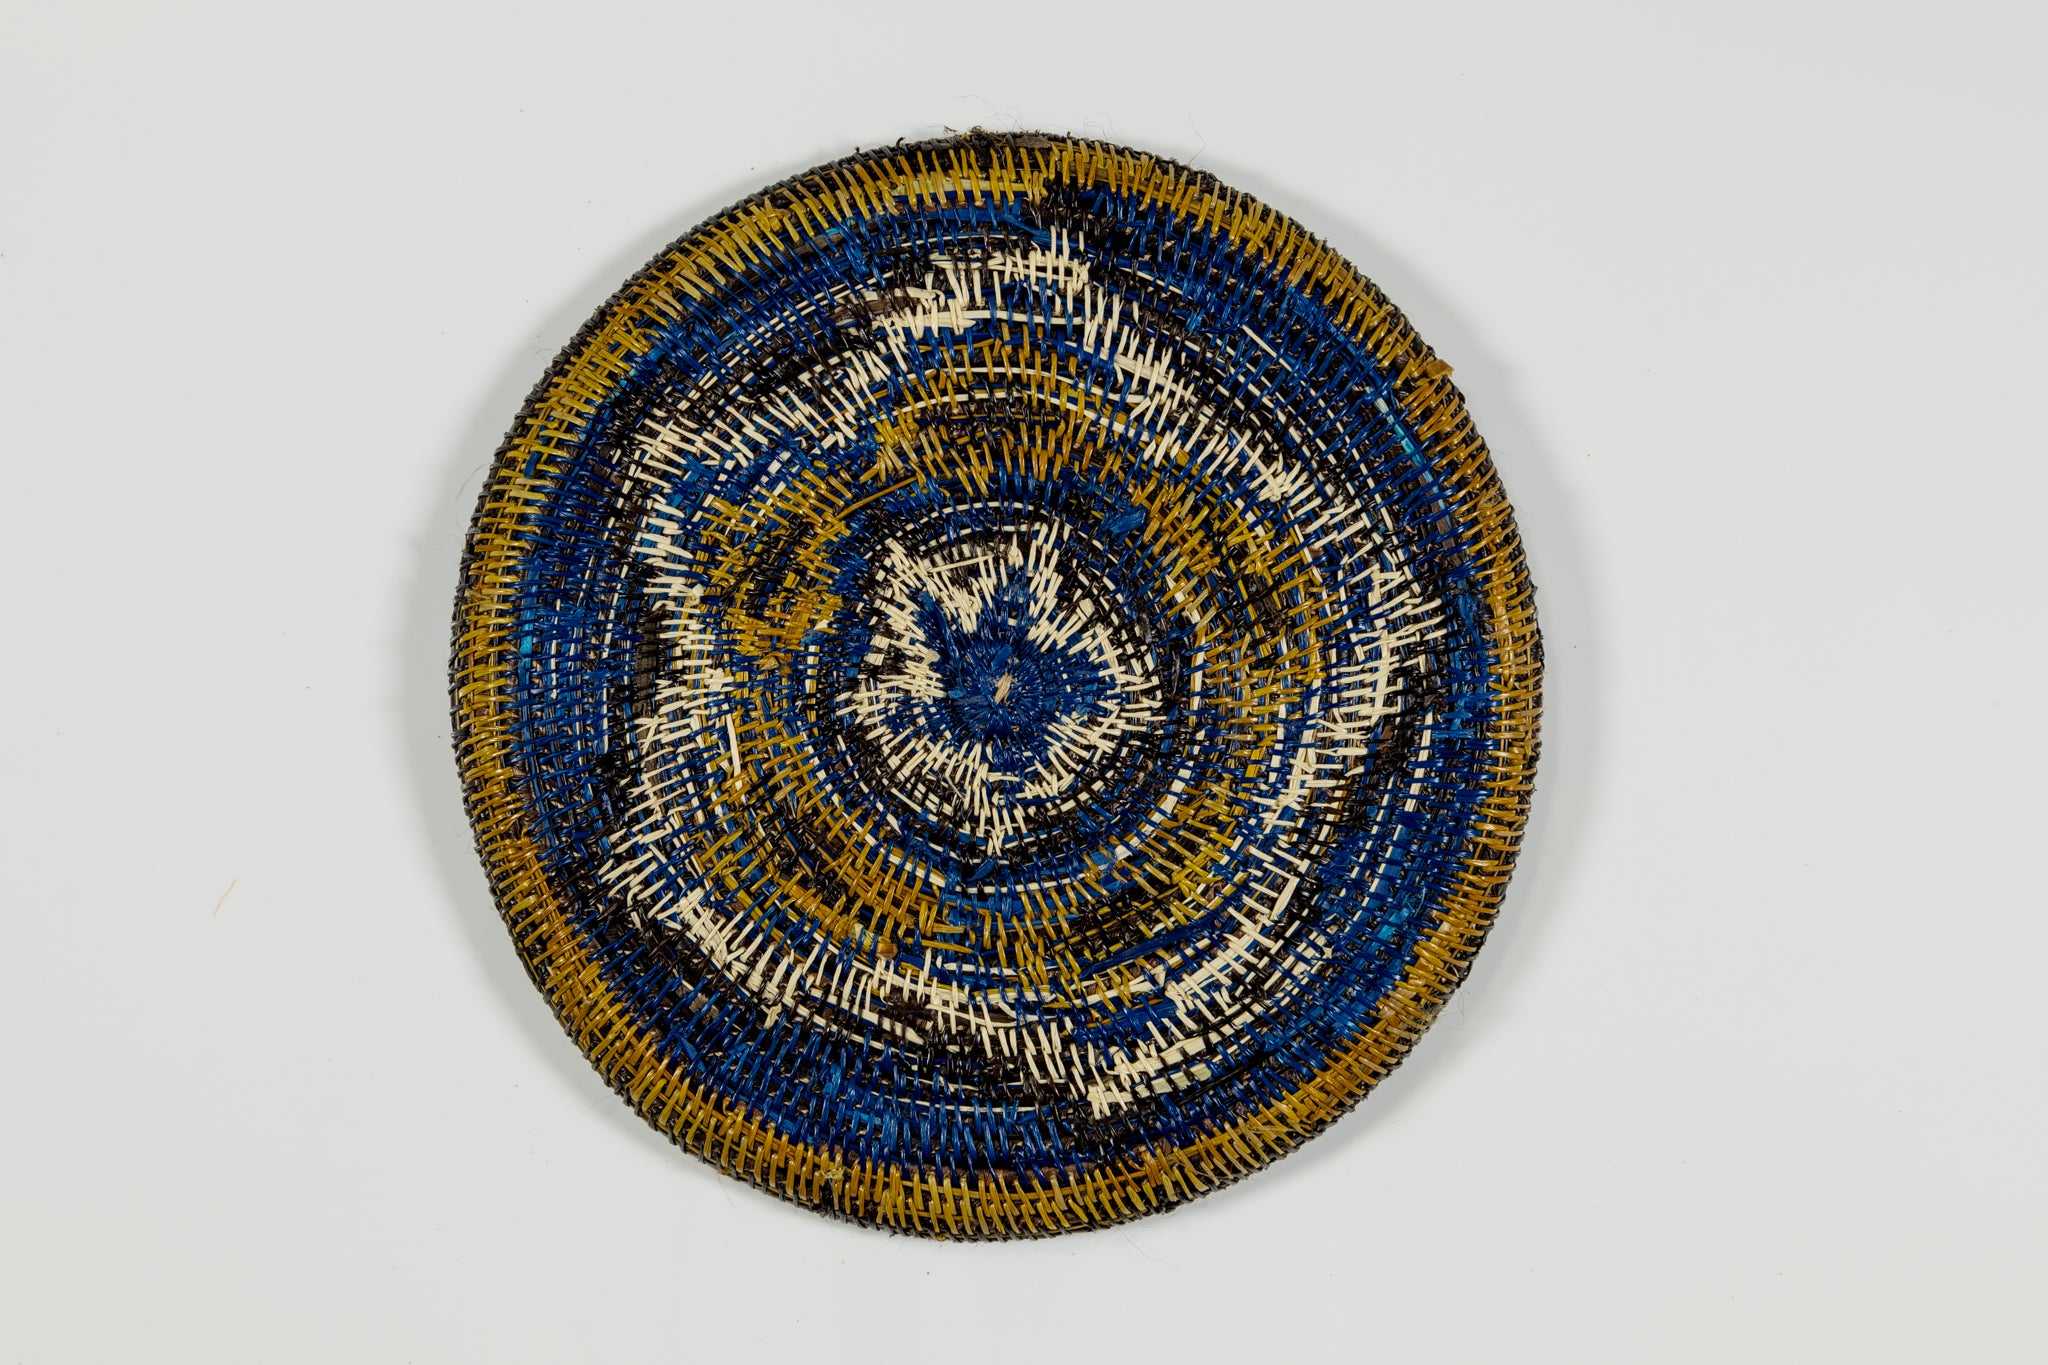 Blue and White Cosmic pulsating Star Basket Plate